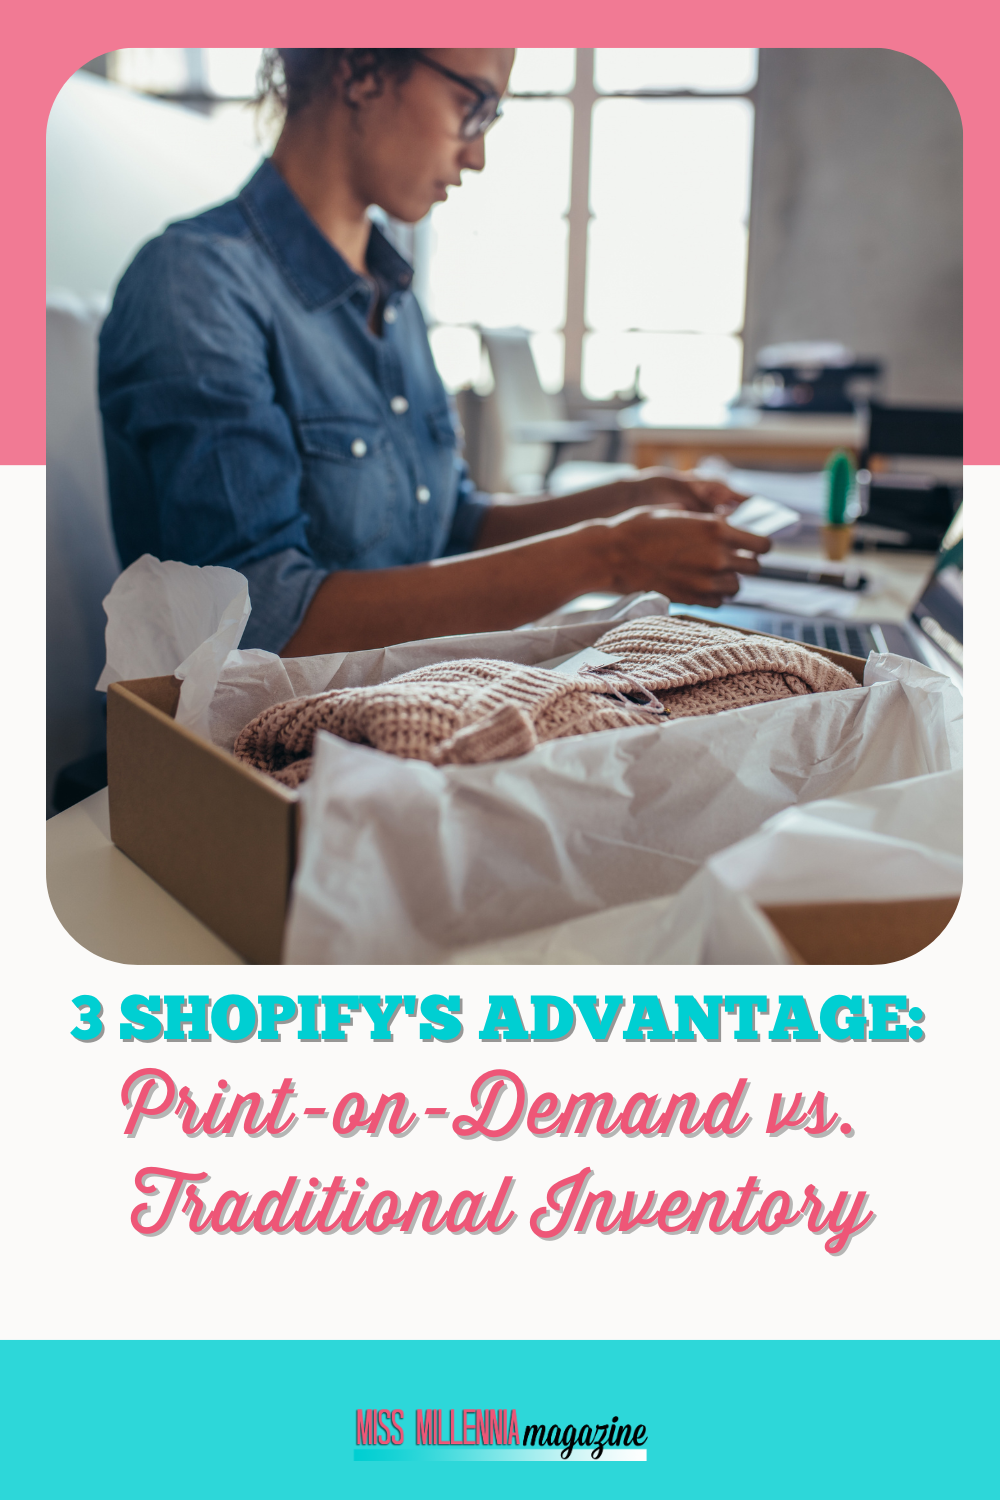 3 Shopify's Advantage: Print-on-Demand vs. Traditional Inventory